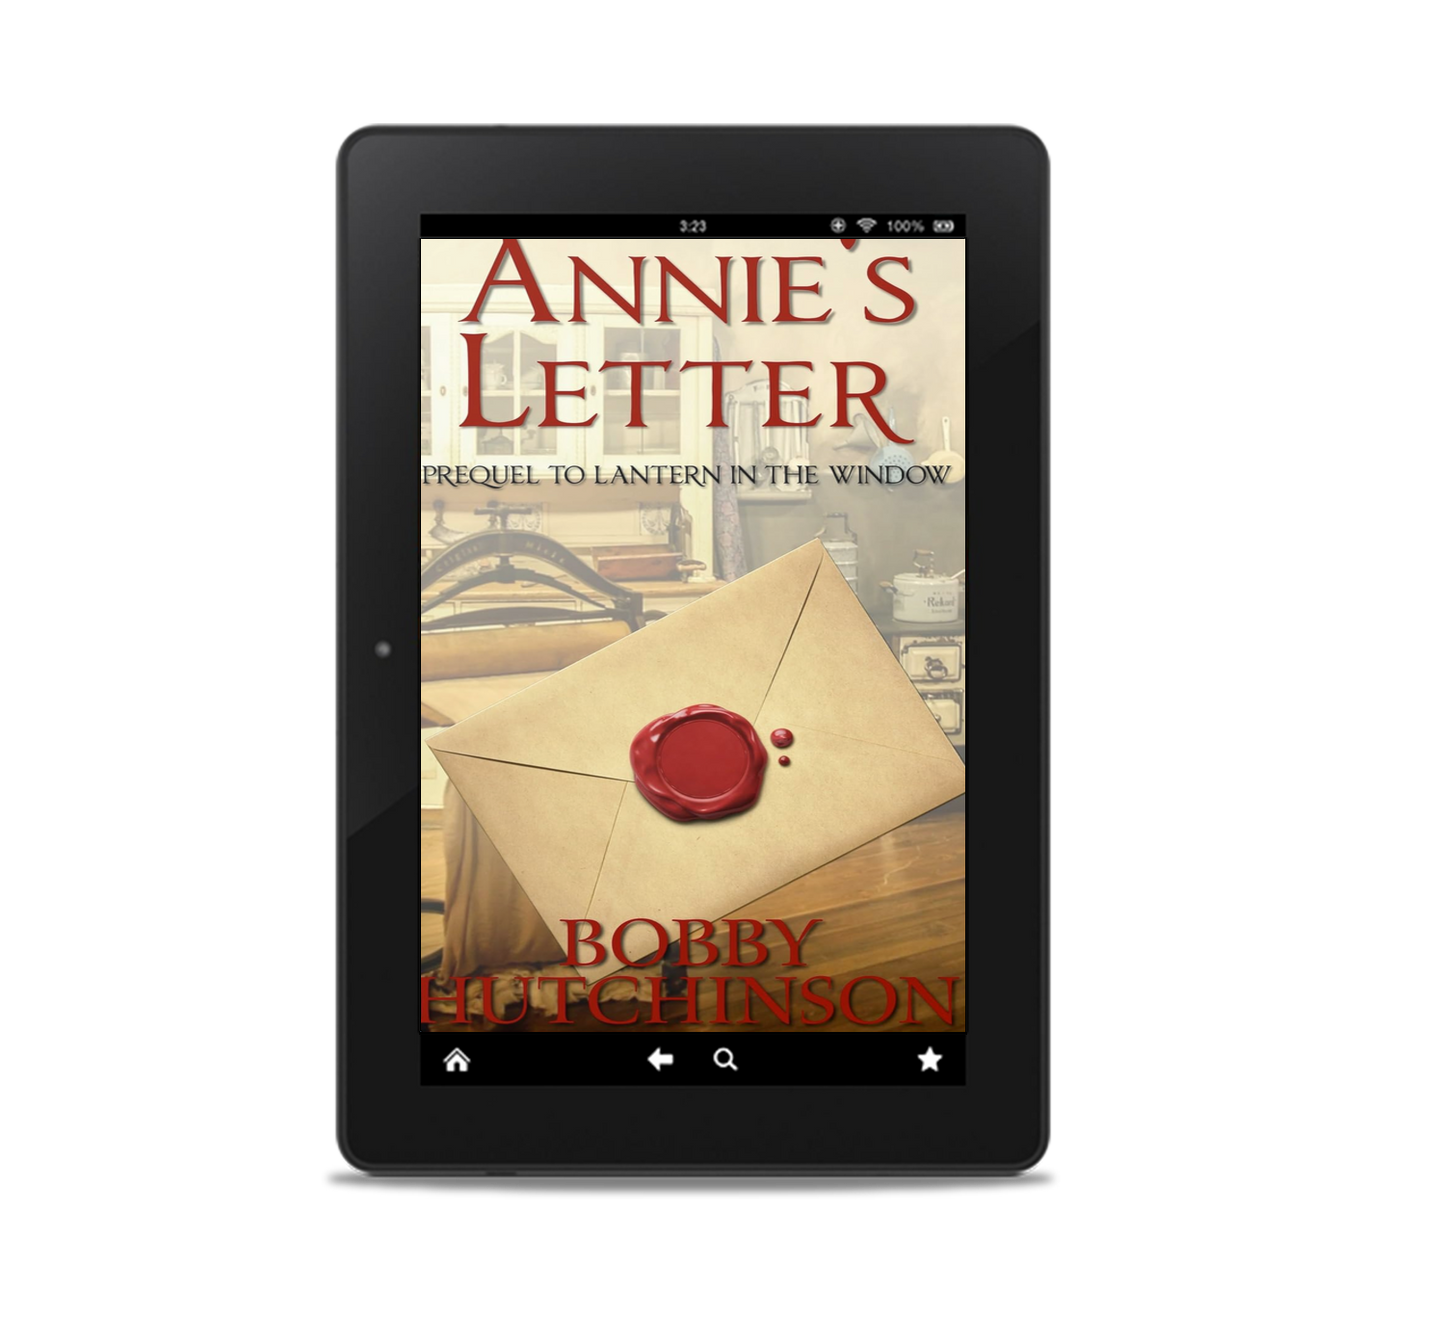 Annie's Letter by Bobby Hutchinson